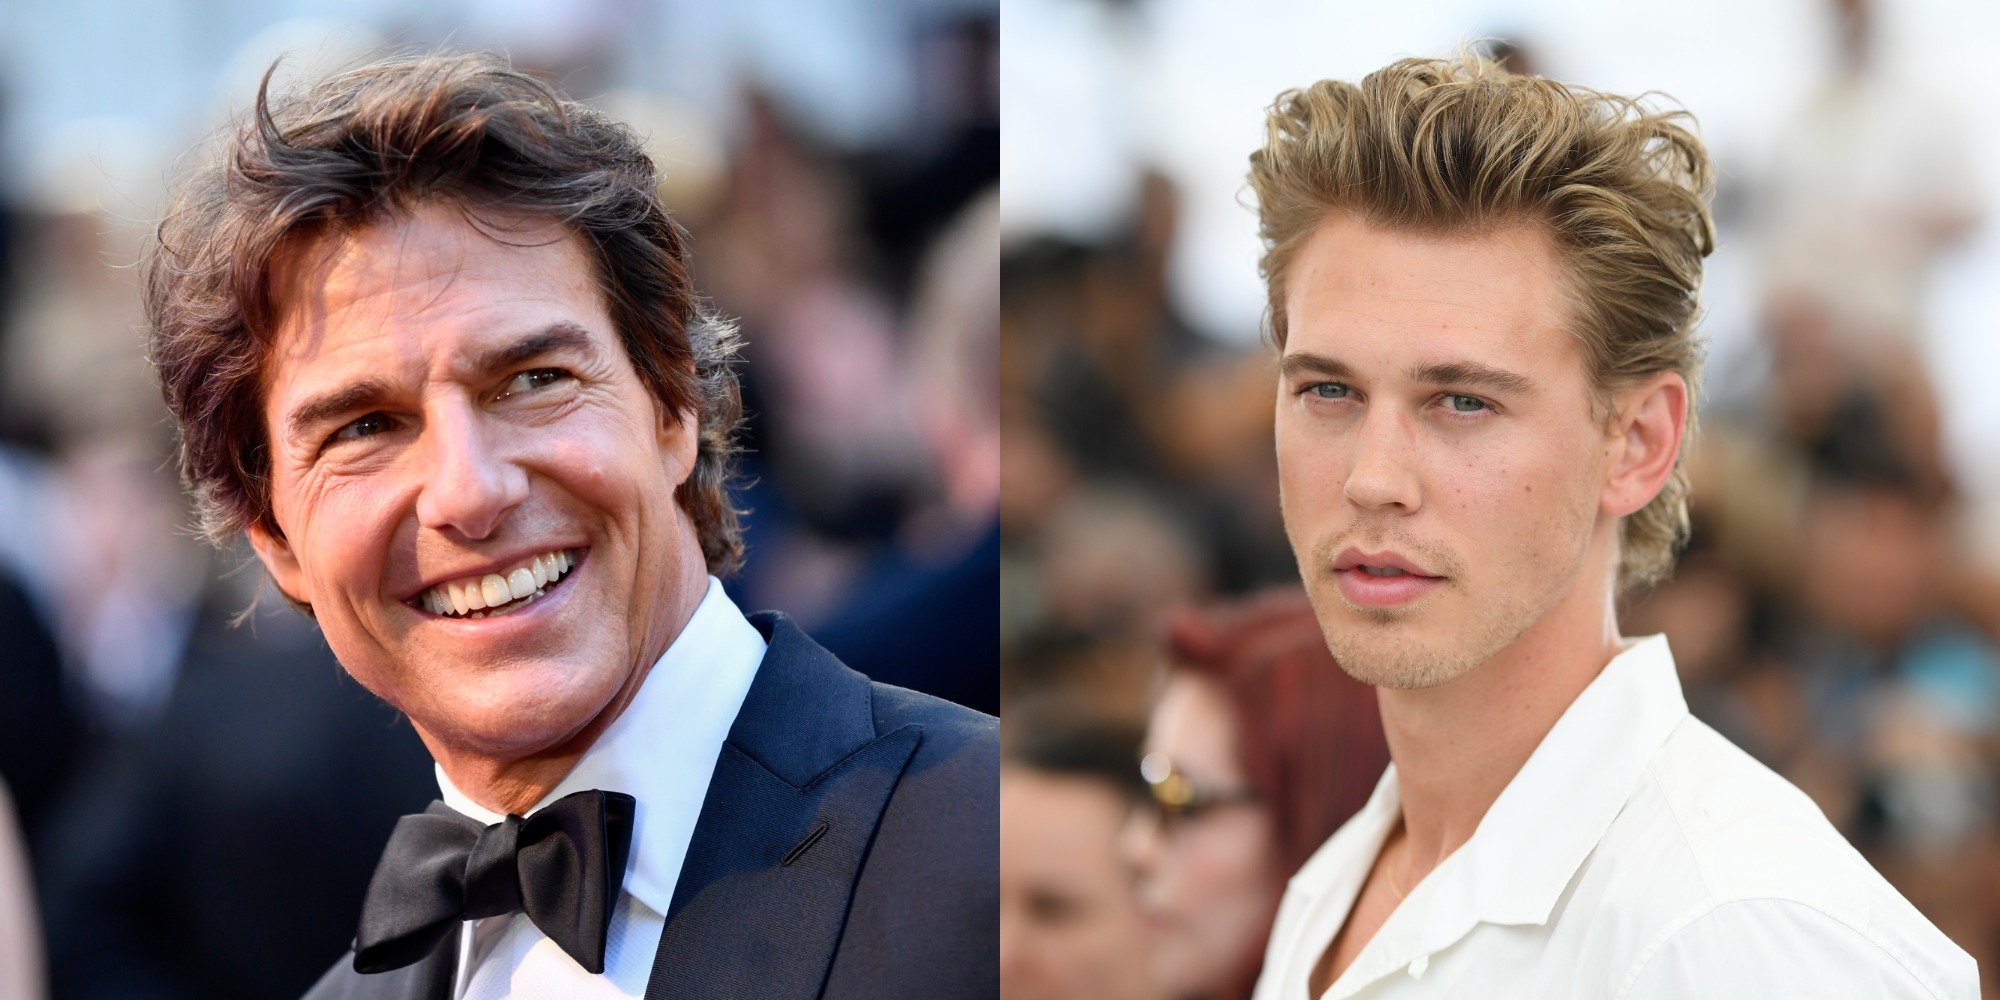 Tom Cruise and Austin Butler pictured in side-by-side images as they promote 'Top Gun: Maverick' and 'Elvis.'